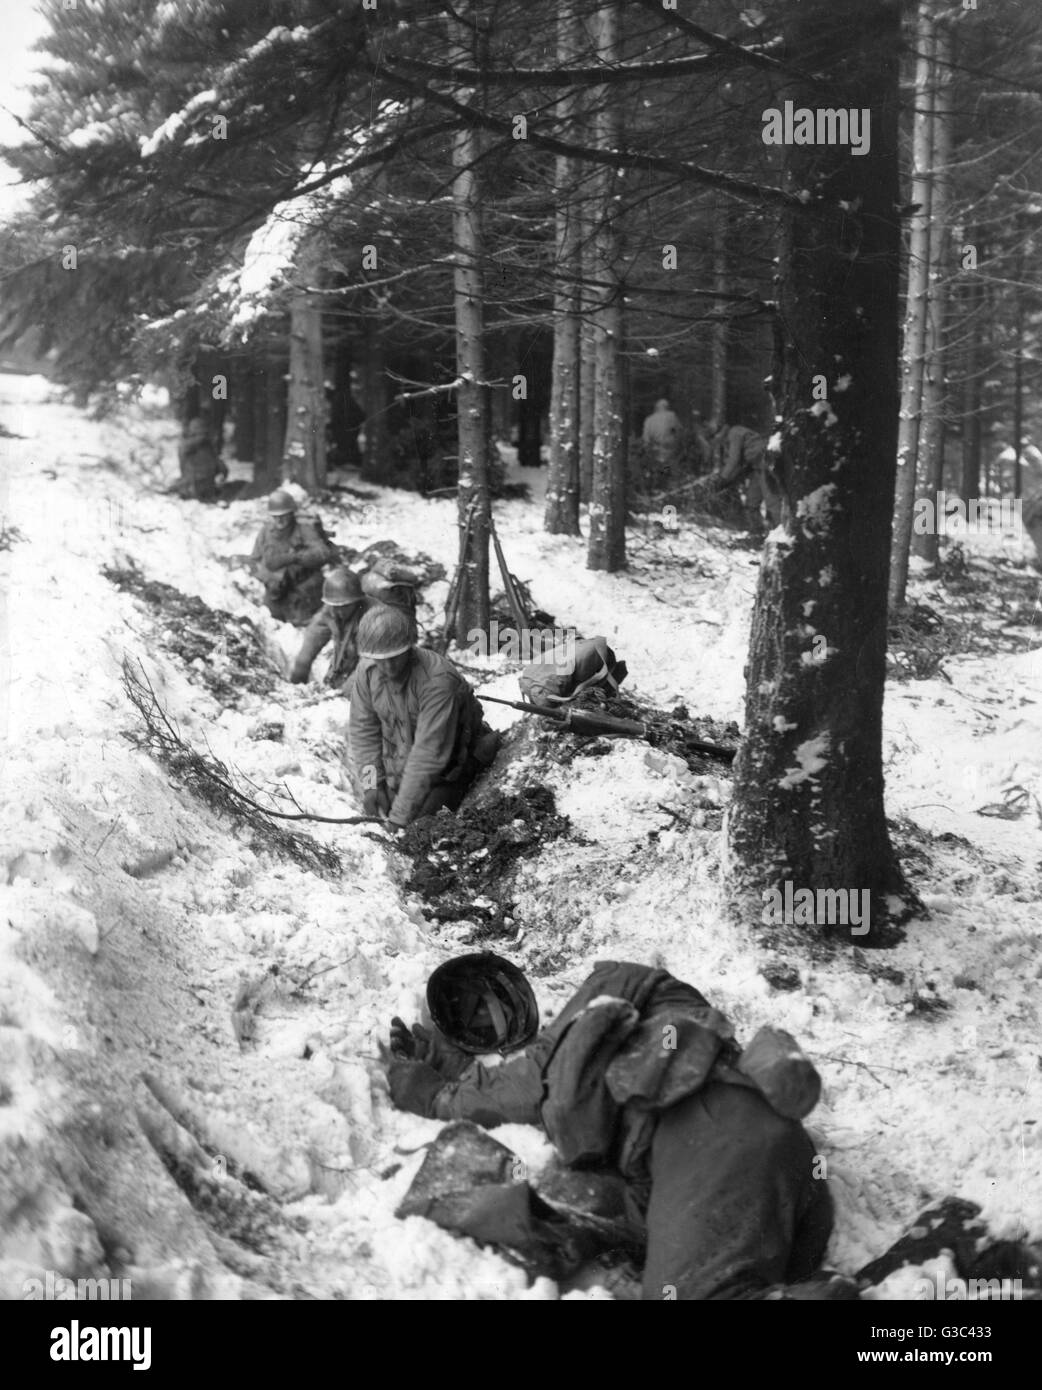 American soldiers dig in on the edge of a forest in the Ardennes region of Belgium, scene of the German counter-offensive in December 1944 that became known as the Battle of the Bulge     Date: December 1944 Stock Photo